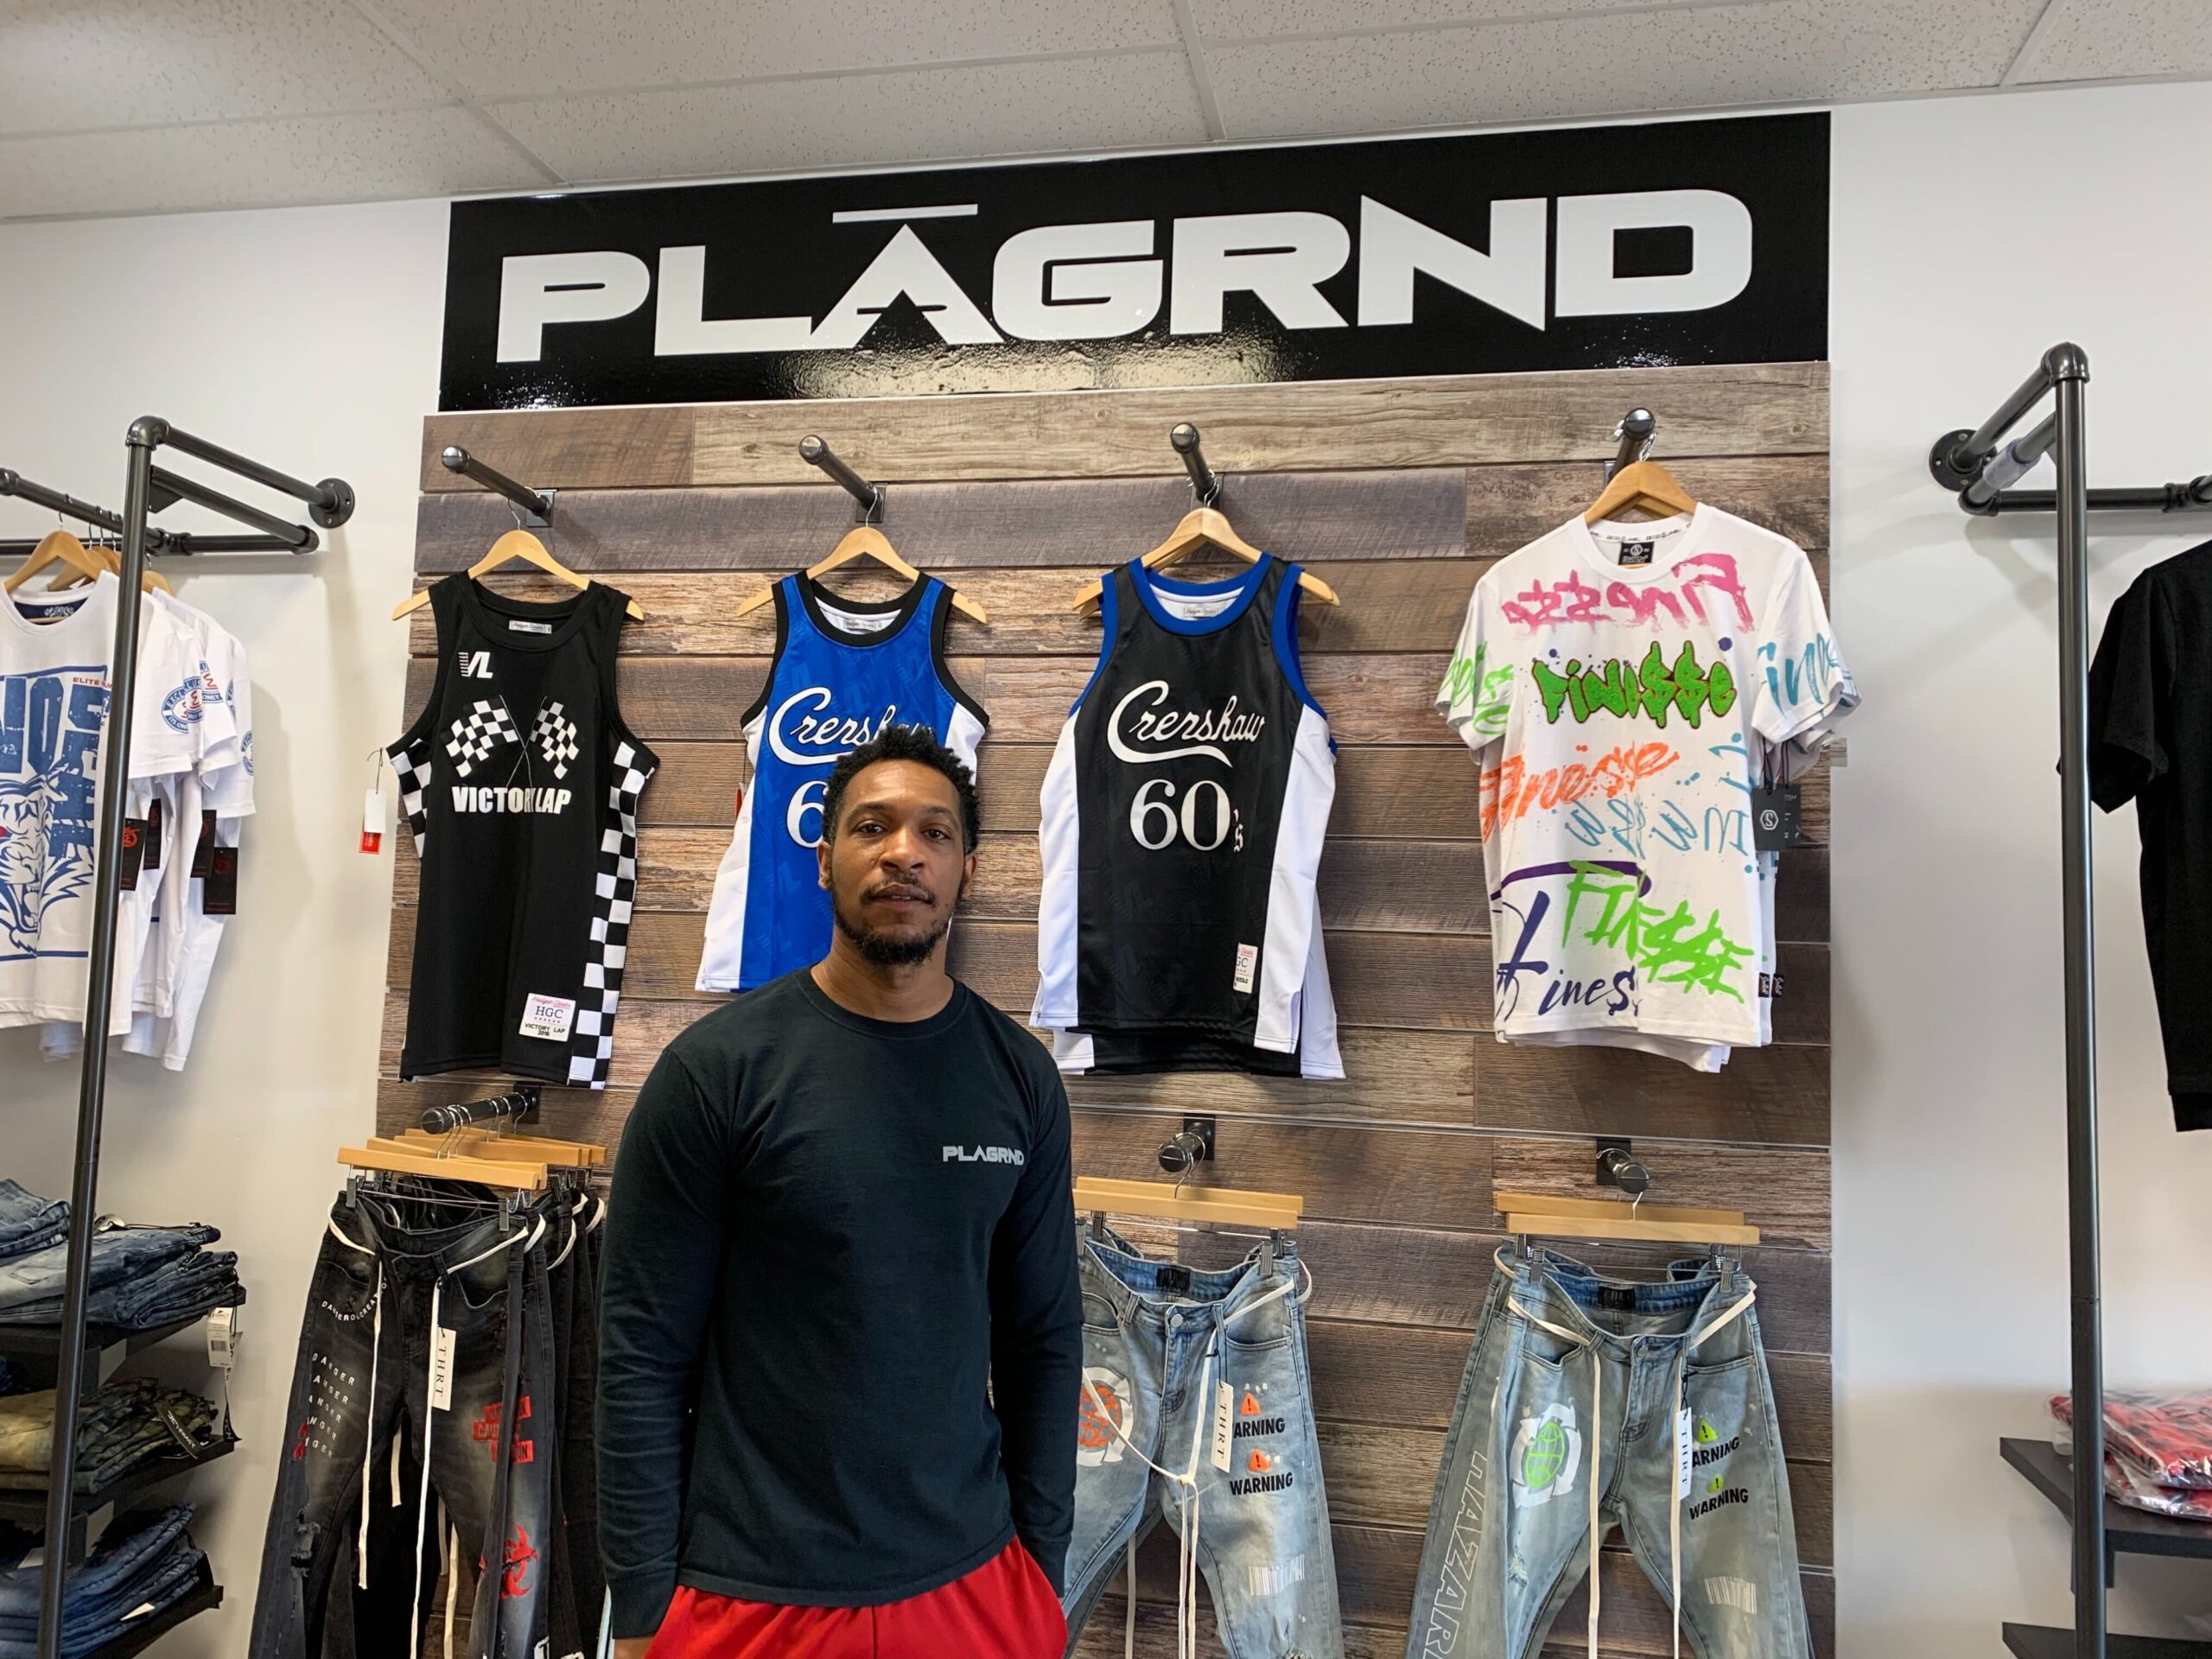 Synika Kirk poses PLAGRND, his clothing store in Green Bay